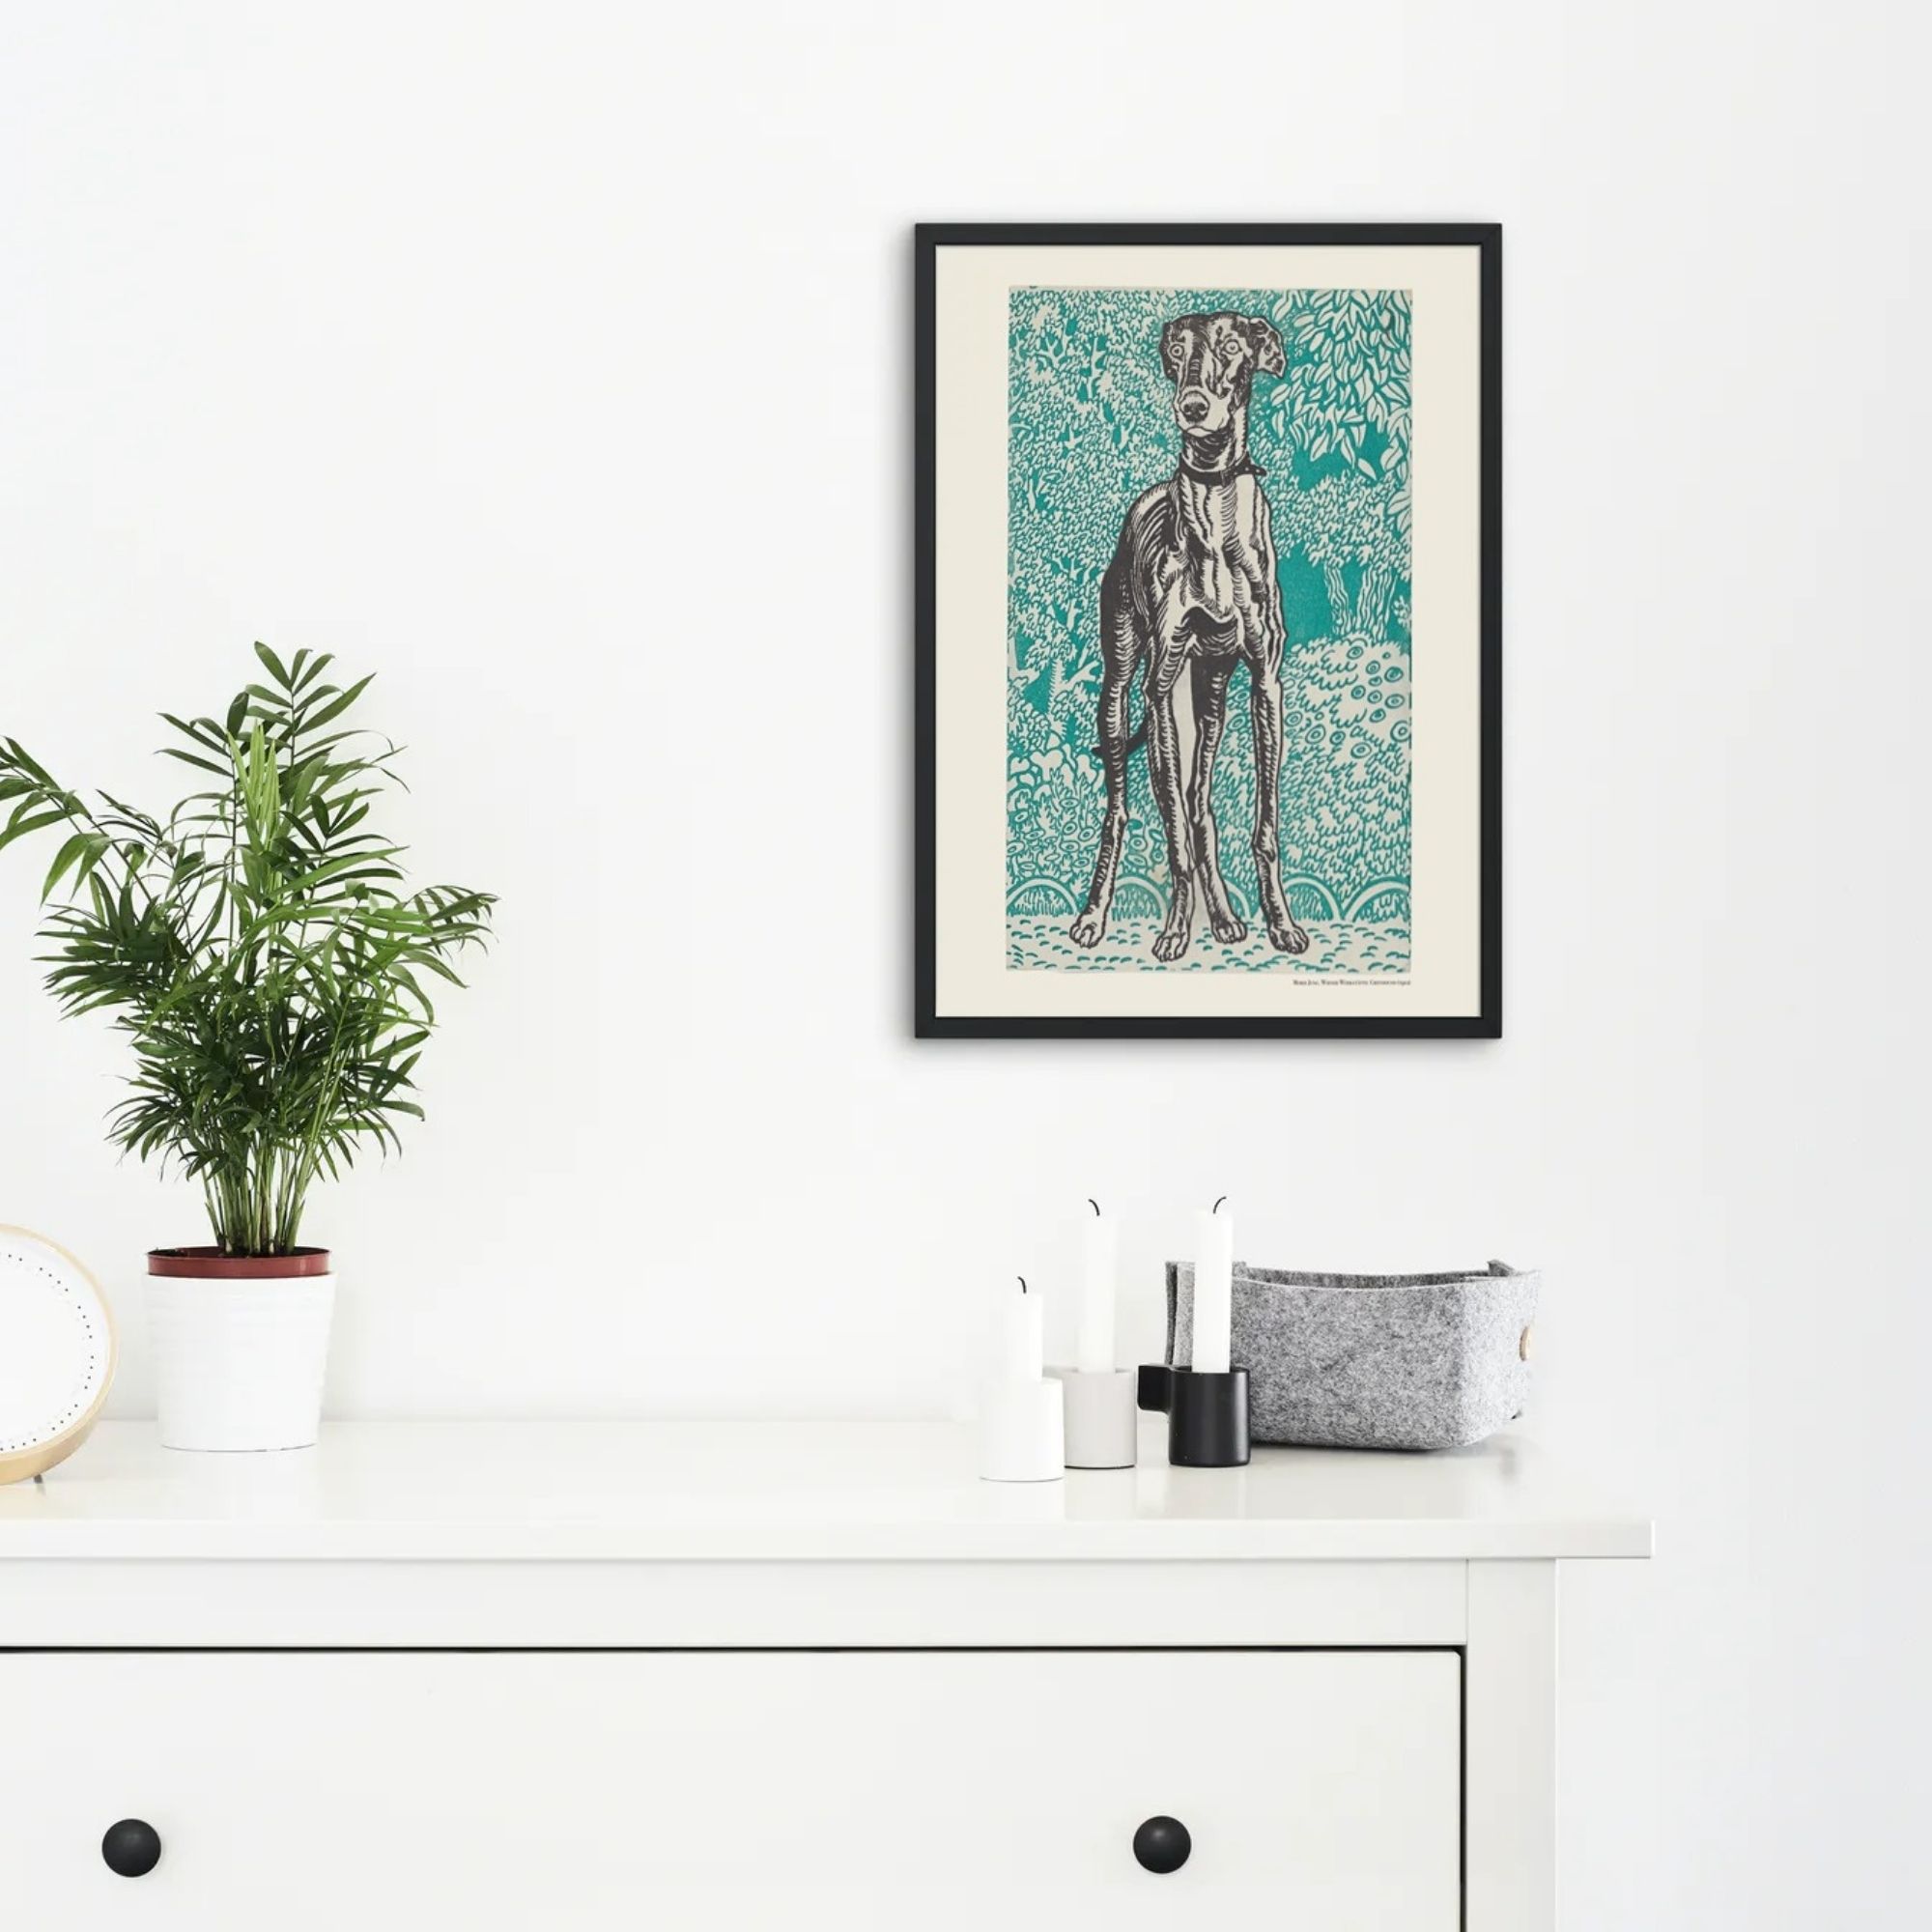 Color woodcut print by Moriz Jung showcasing a detailed illustration of a slender dog, possibly a greyhound or saluki, standing amidst a backdrop of intricate green foliage patterns with small blue dots on the ground.